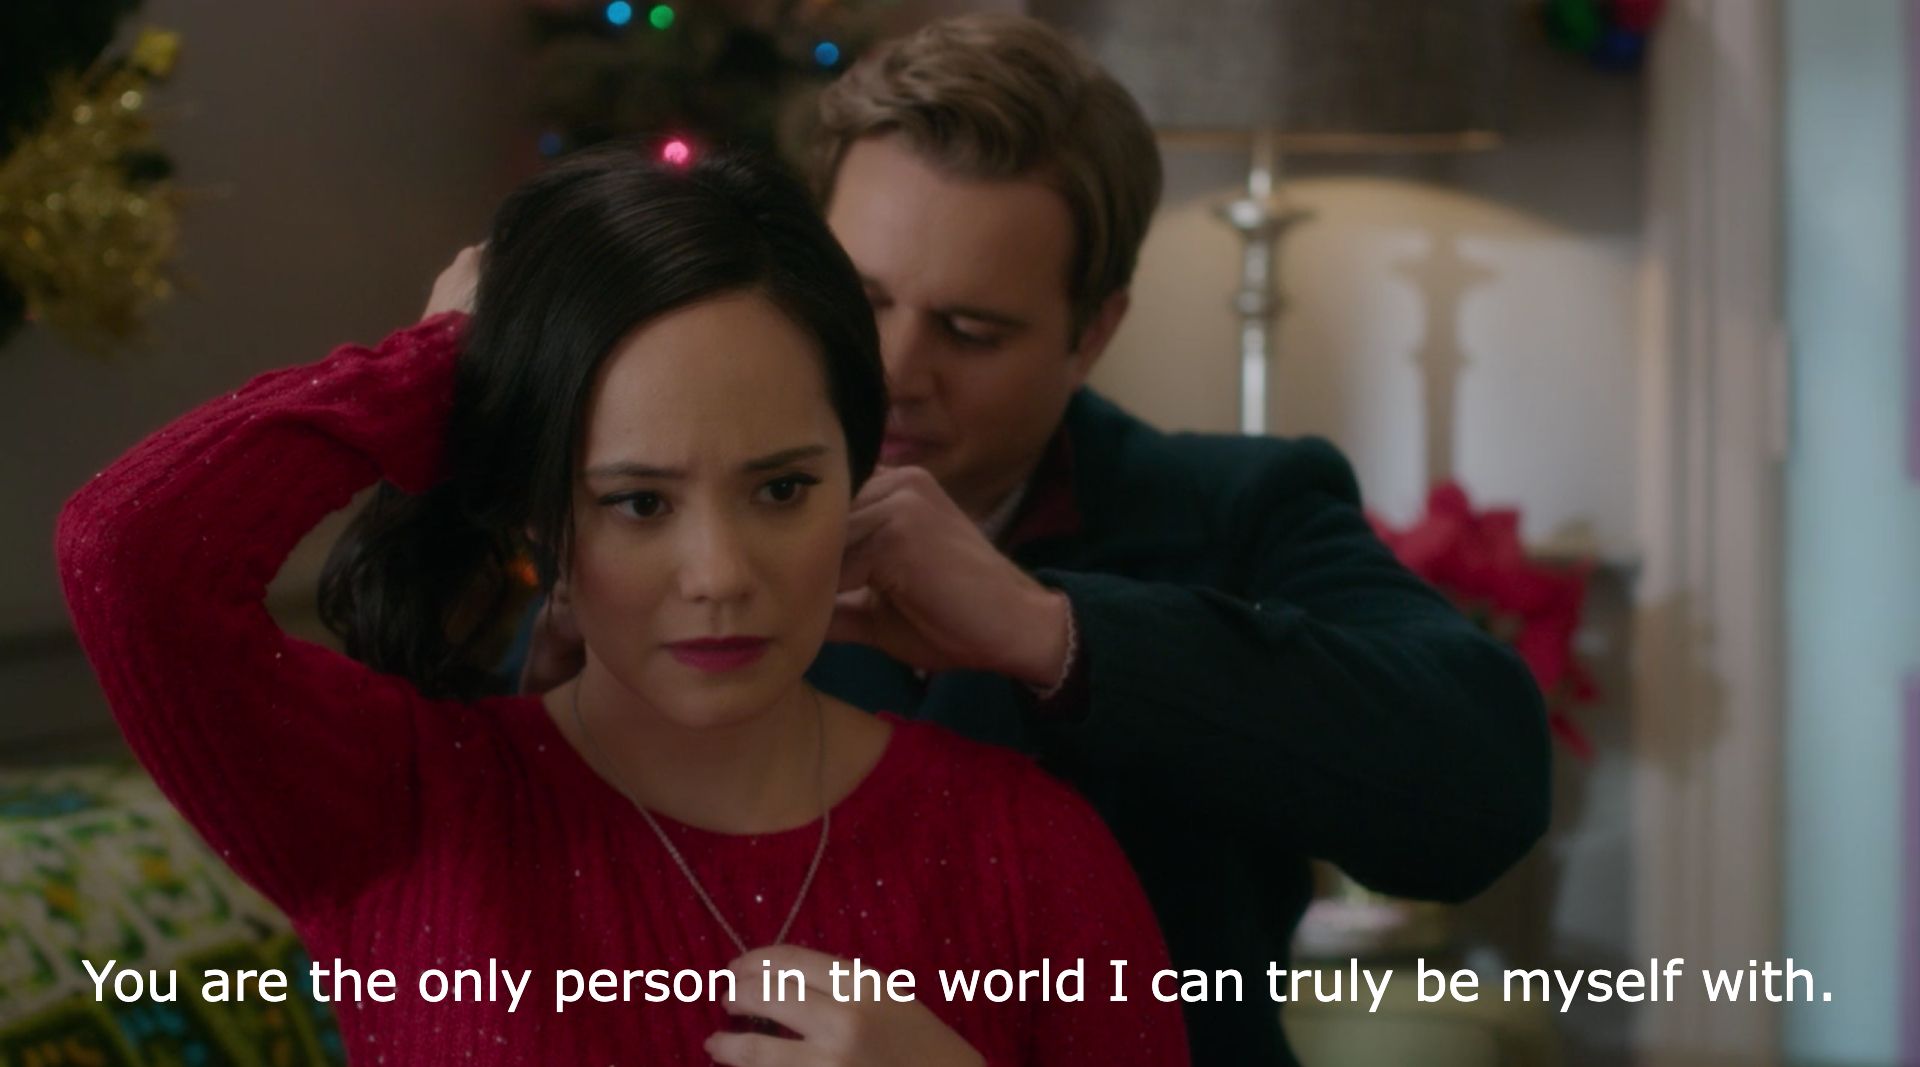 Screenshot of a man fastening a necklace for his girlfriend, who looks upset. The caption reads "You are the only person in the world I can truly be myself with."